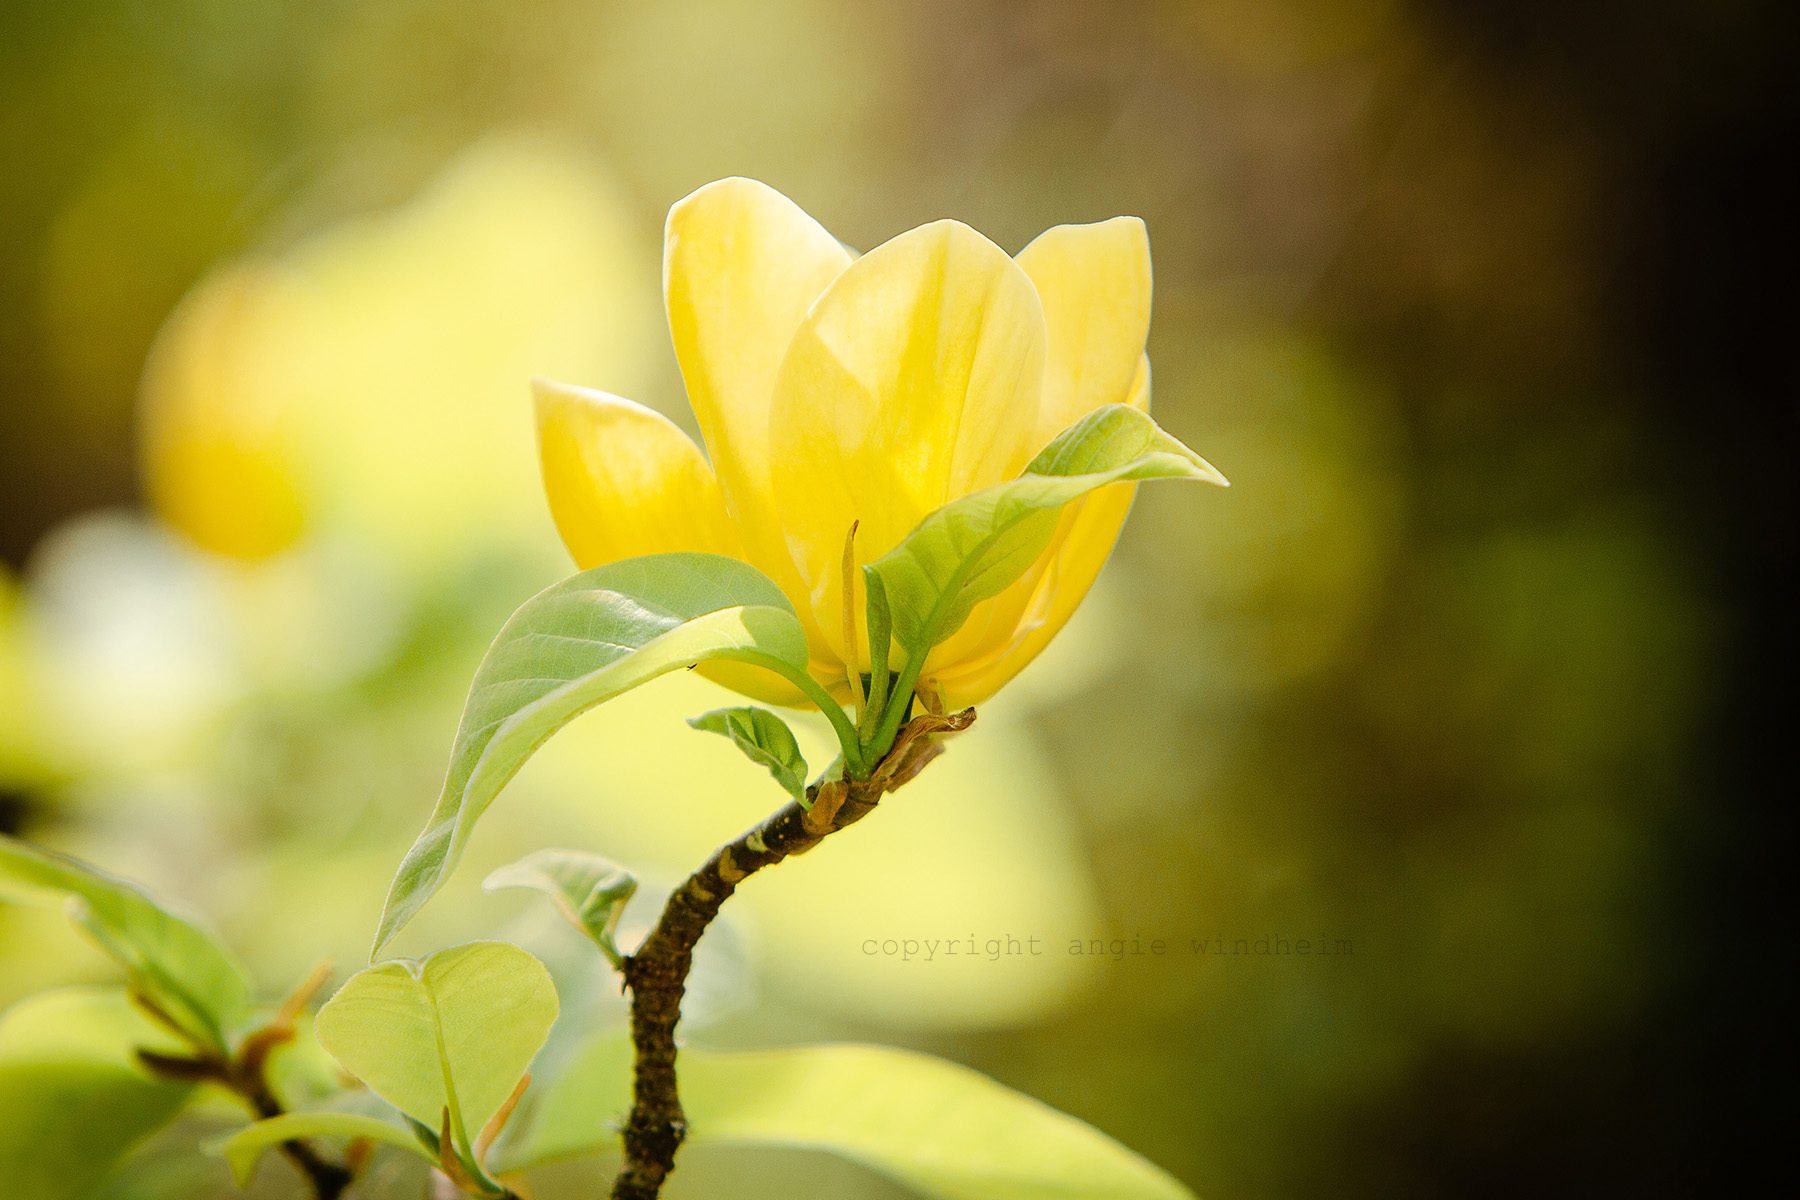 A photograph of a yellow magnolia blossom with a yellow background.